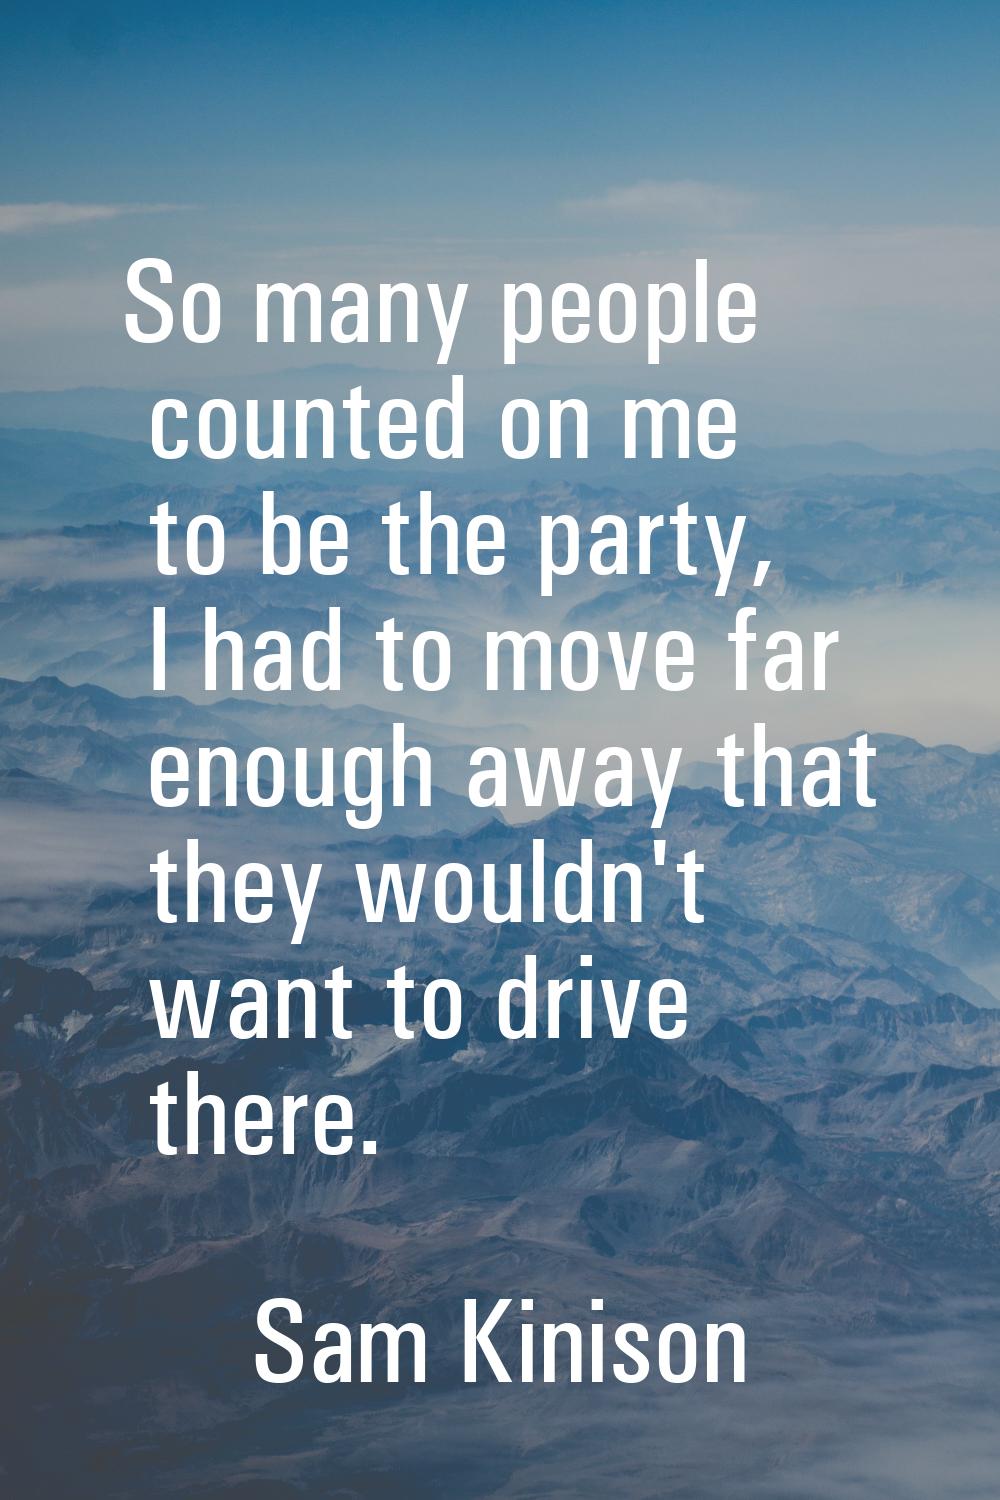 So many people counted on me to be the party, I had to move far enough away that they wouldn't want